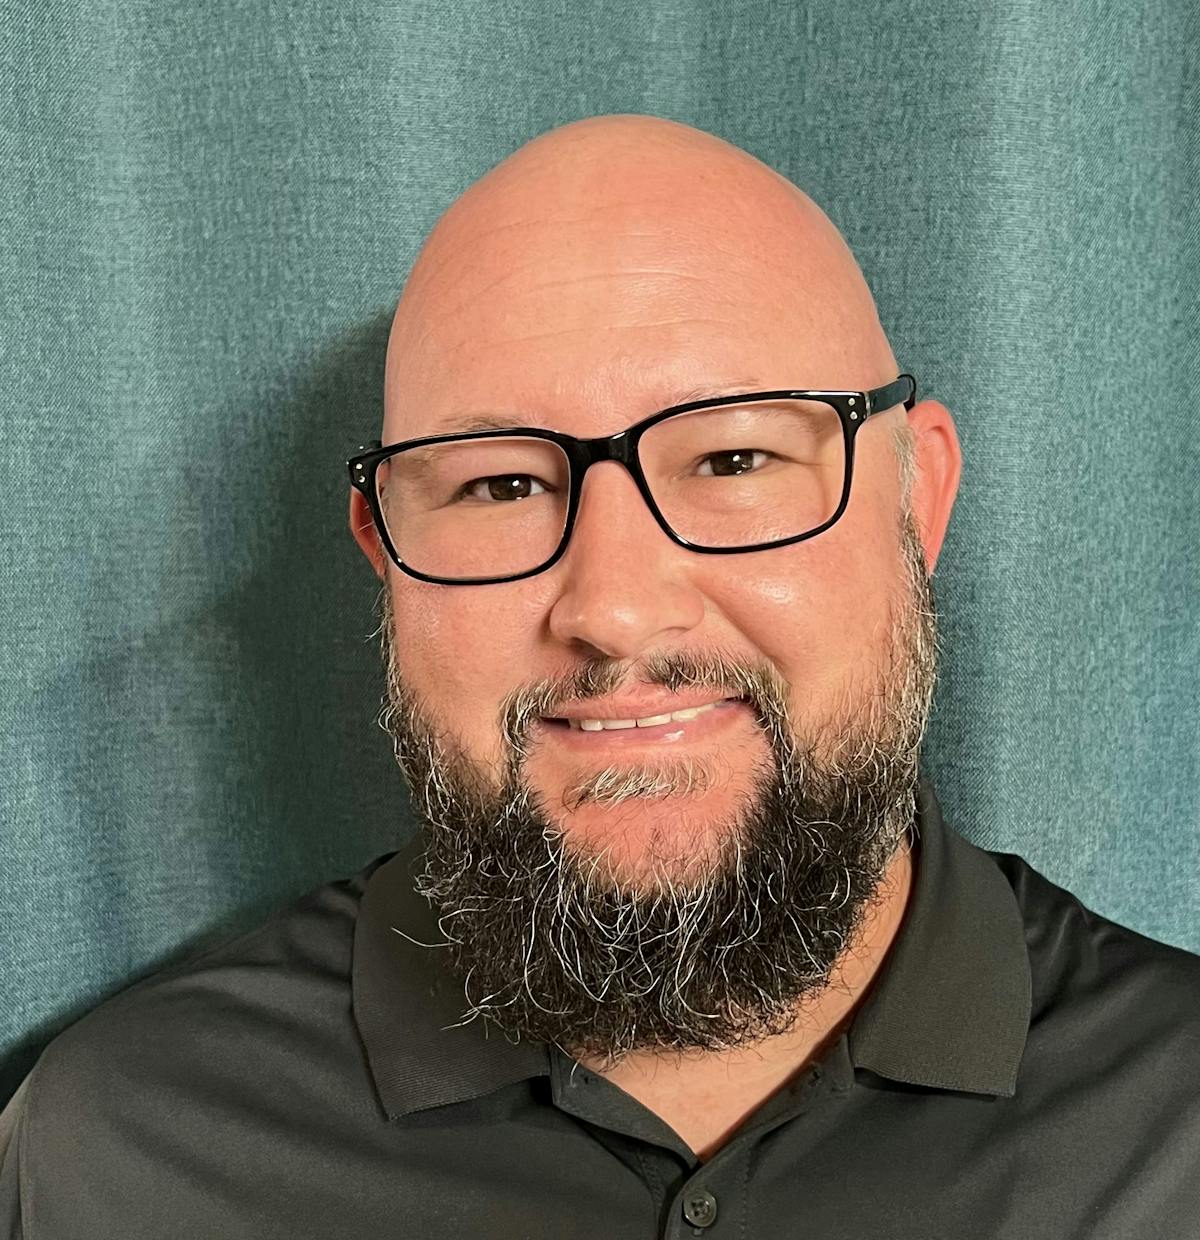 John Fogel, Product Manager at Amglo, has worked with the company for more than 15 years in product development, qualifying products with the FAA and building partnerships.